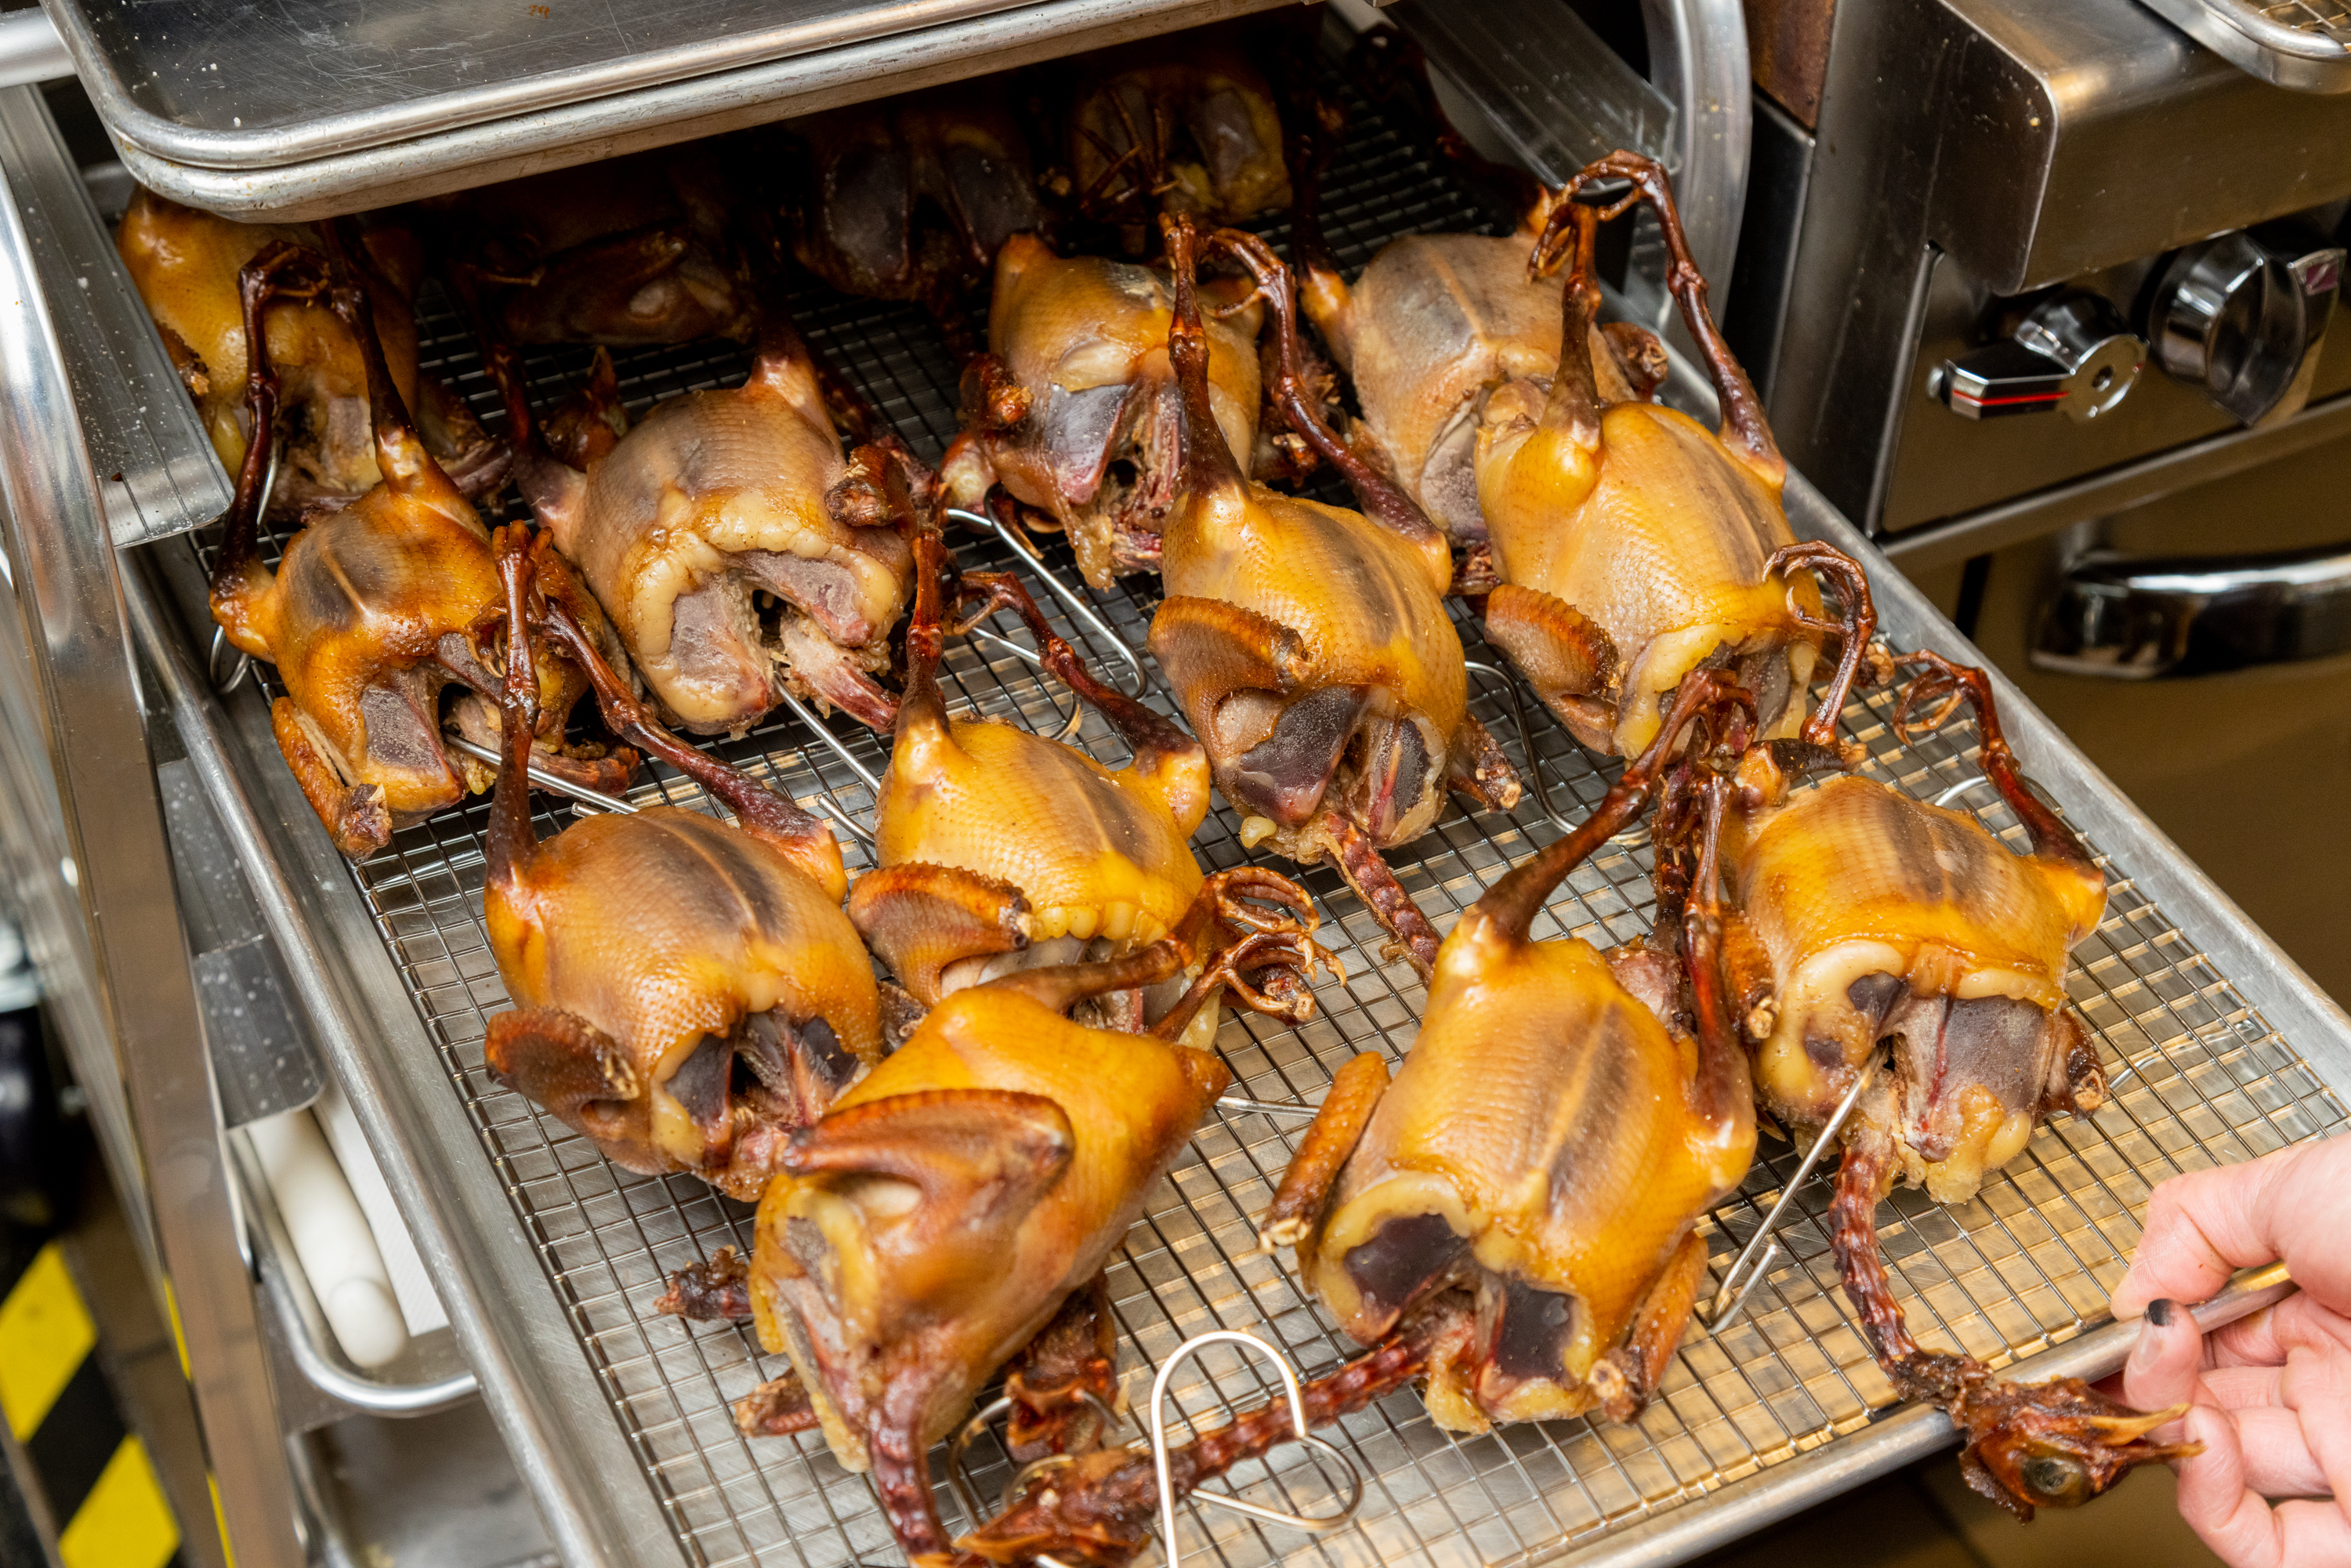 Rows of roasted squab on racks in a metal oven ready for frying.